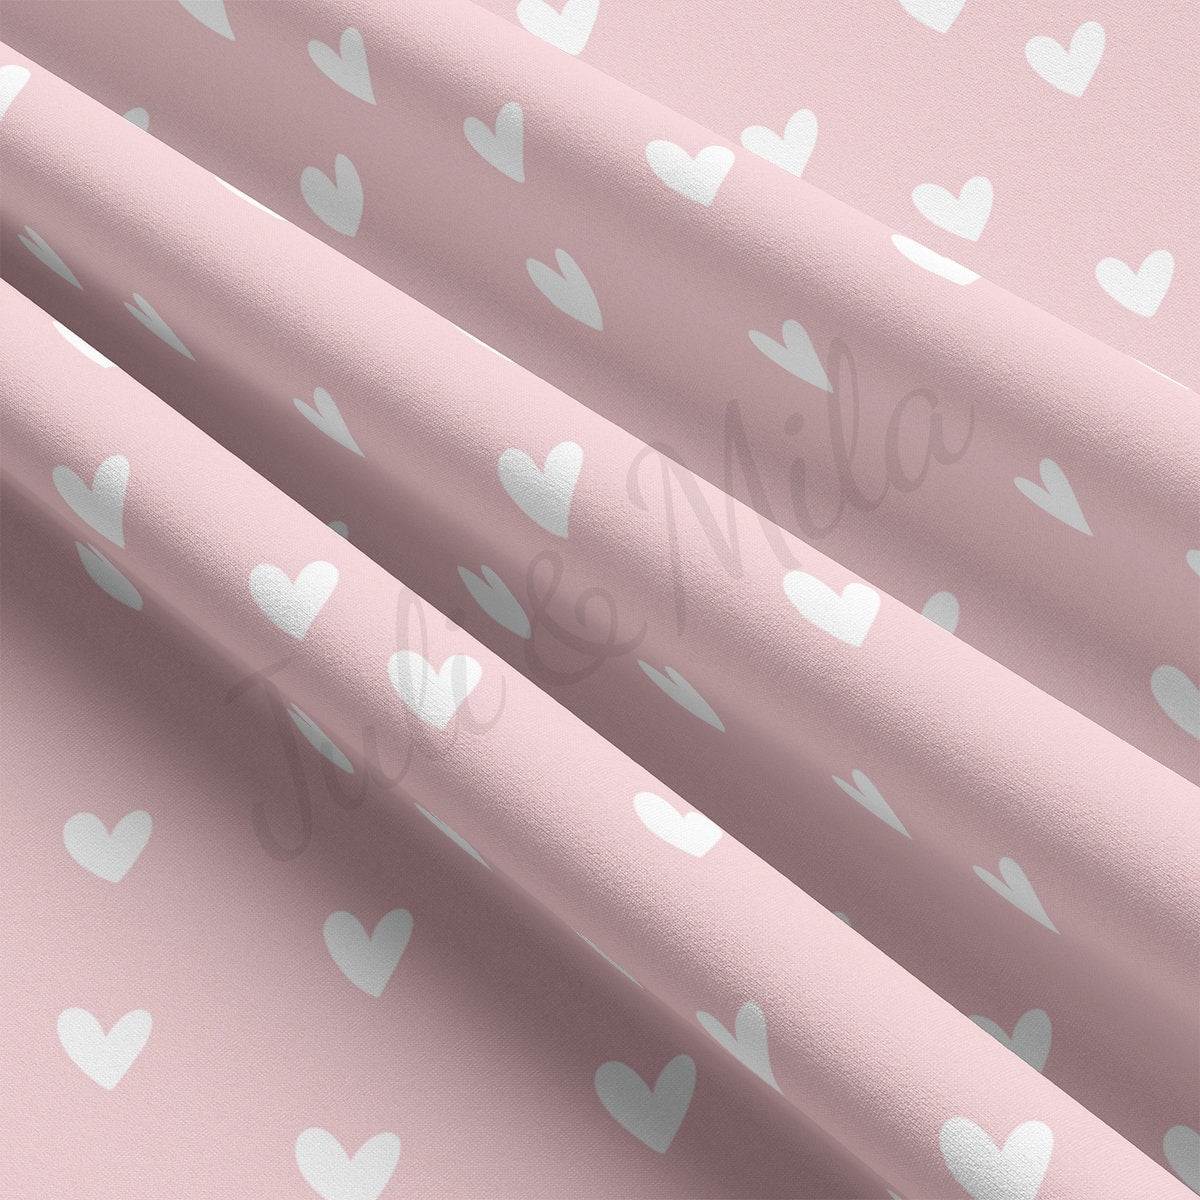 DBP Fabric Double Brushed Polyester DBP2308 Valentine's Day